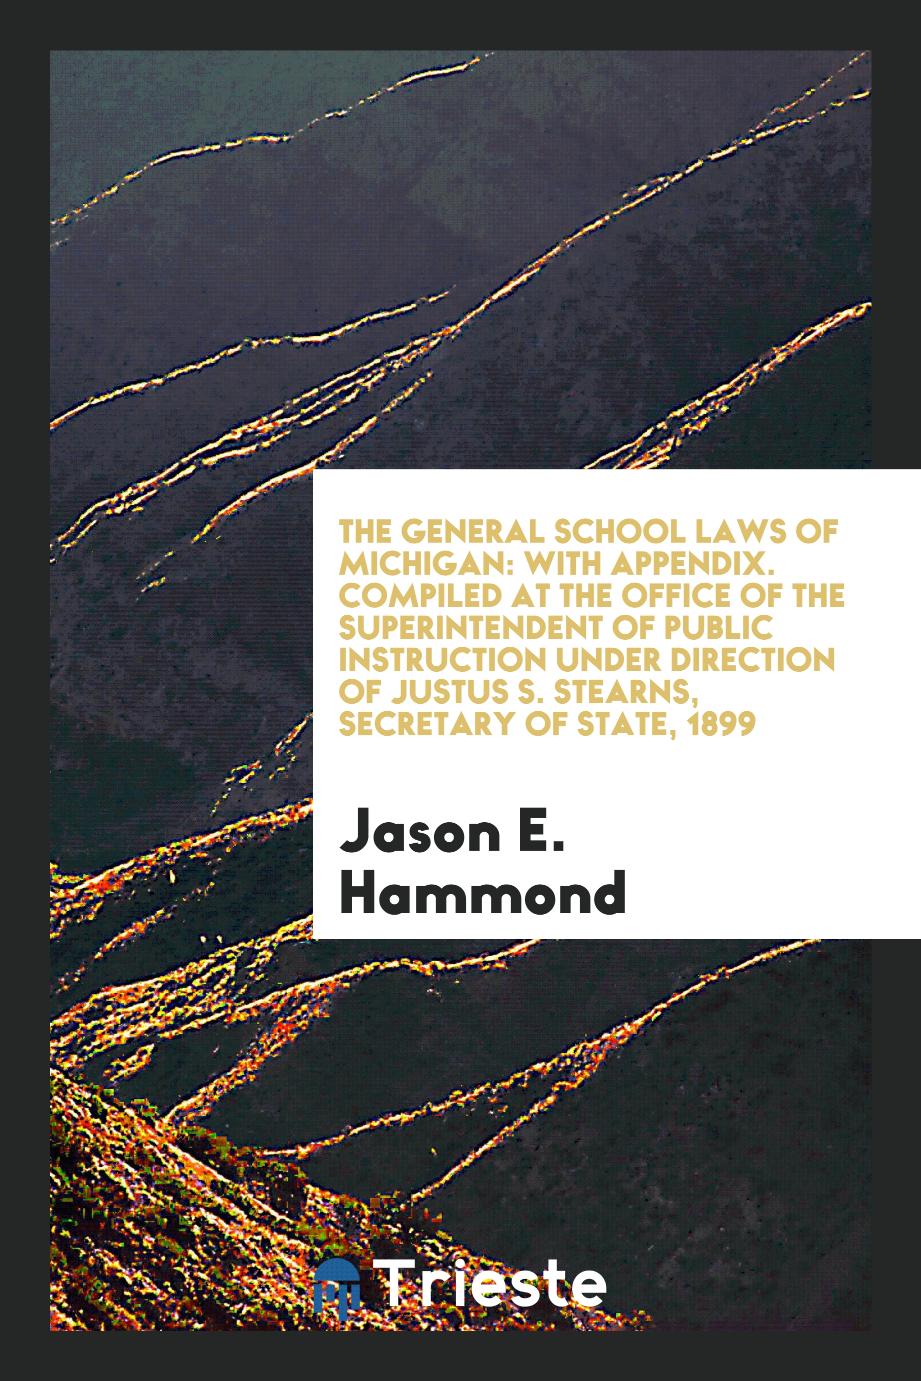 The General School Laws of Michigan: With Appendix. Compiled at the Office of the Superintendent of Public Instruction under Direction of Justus S. Stearns, Secretary of State, 1899